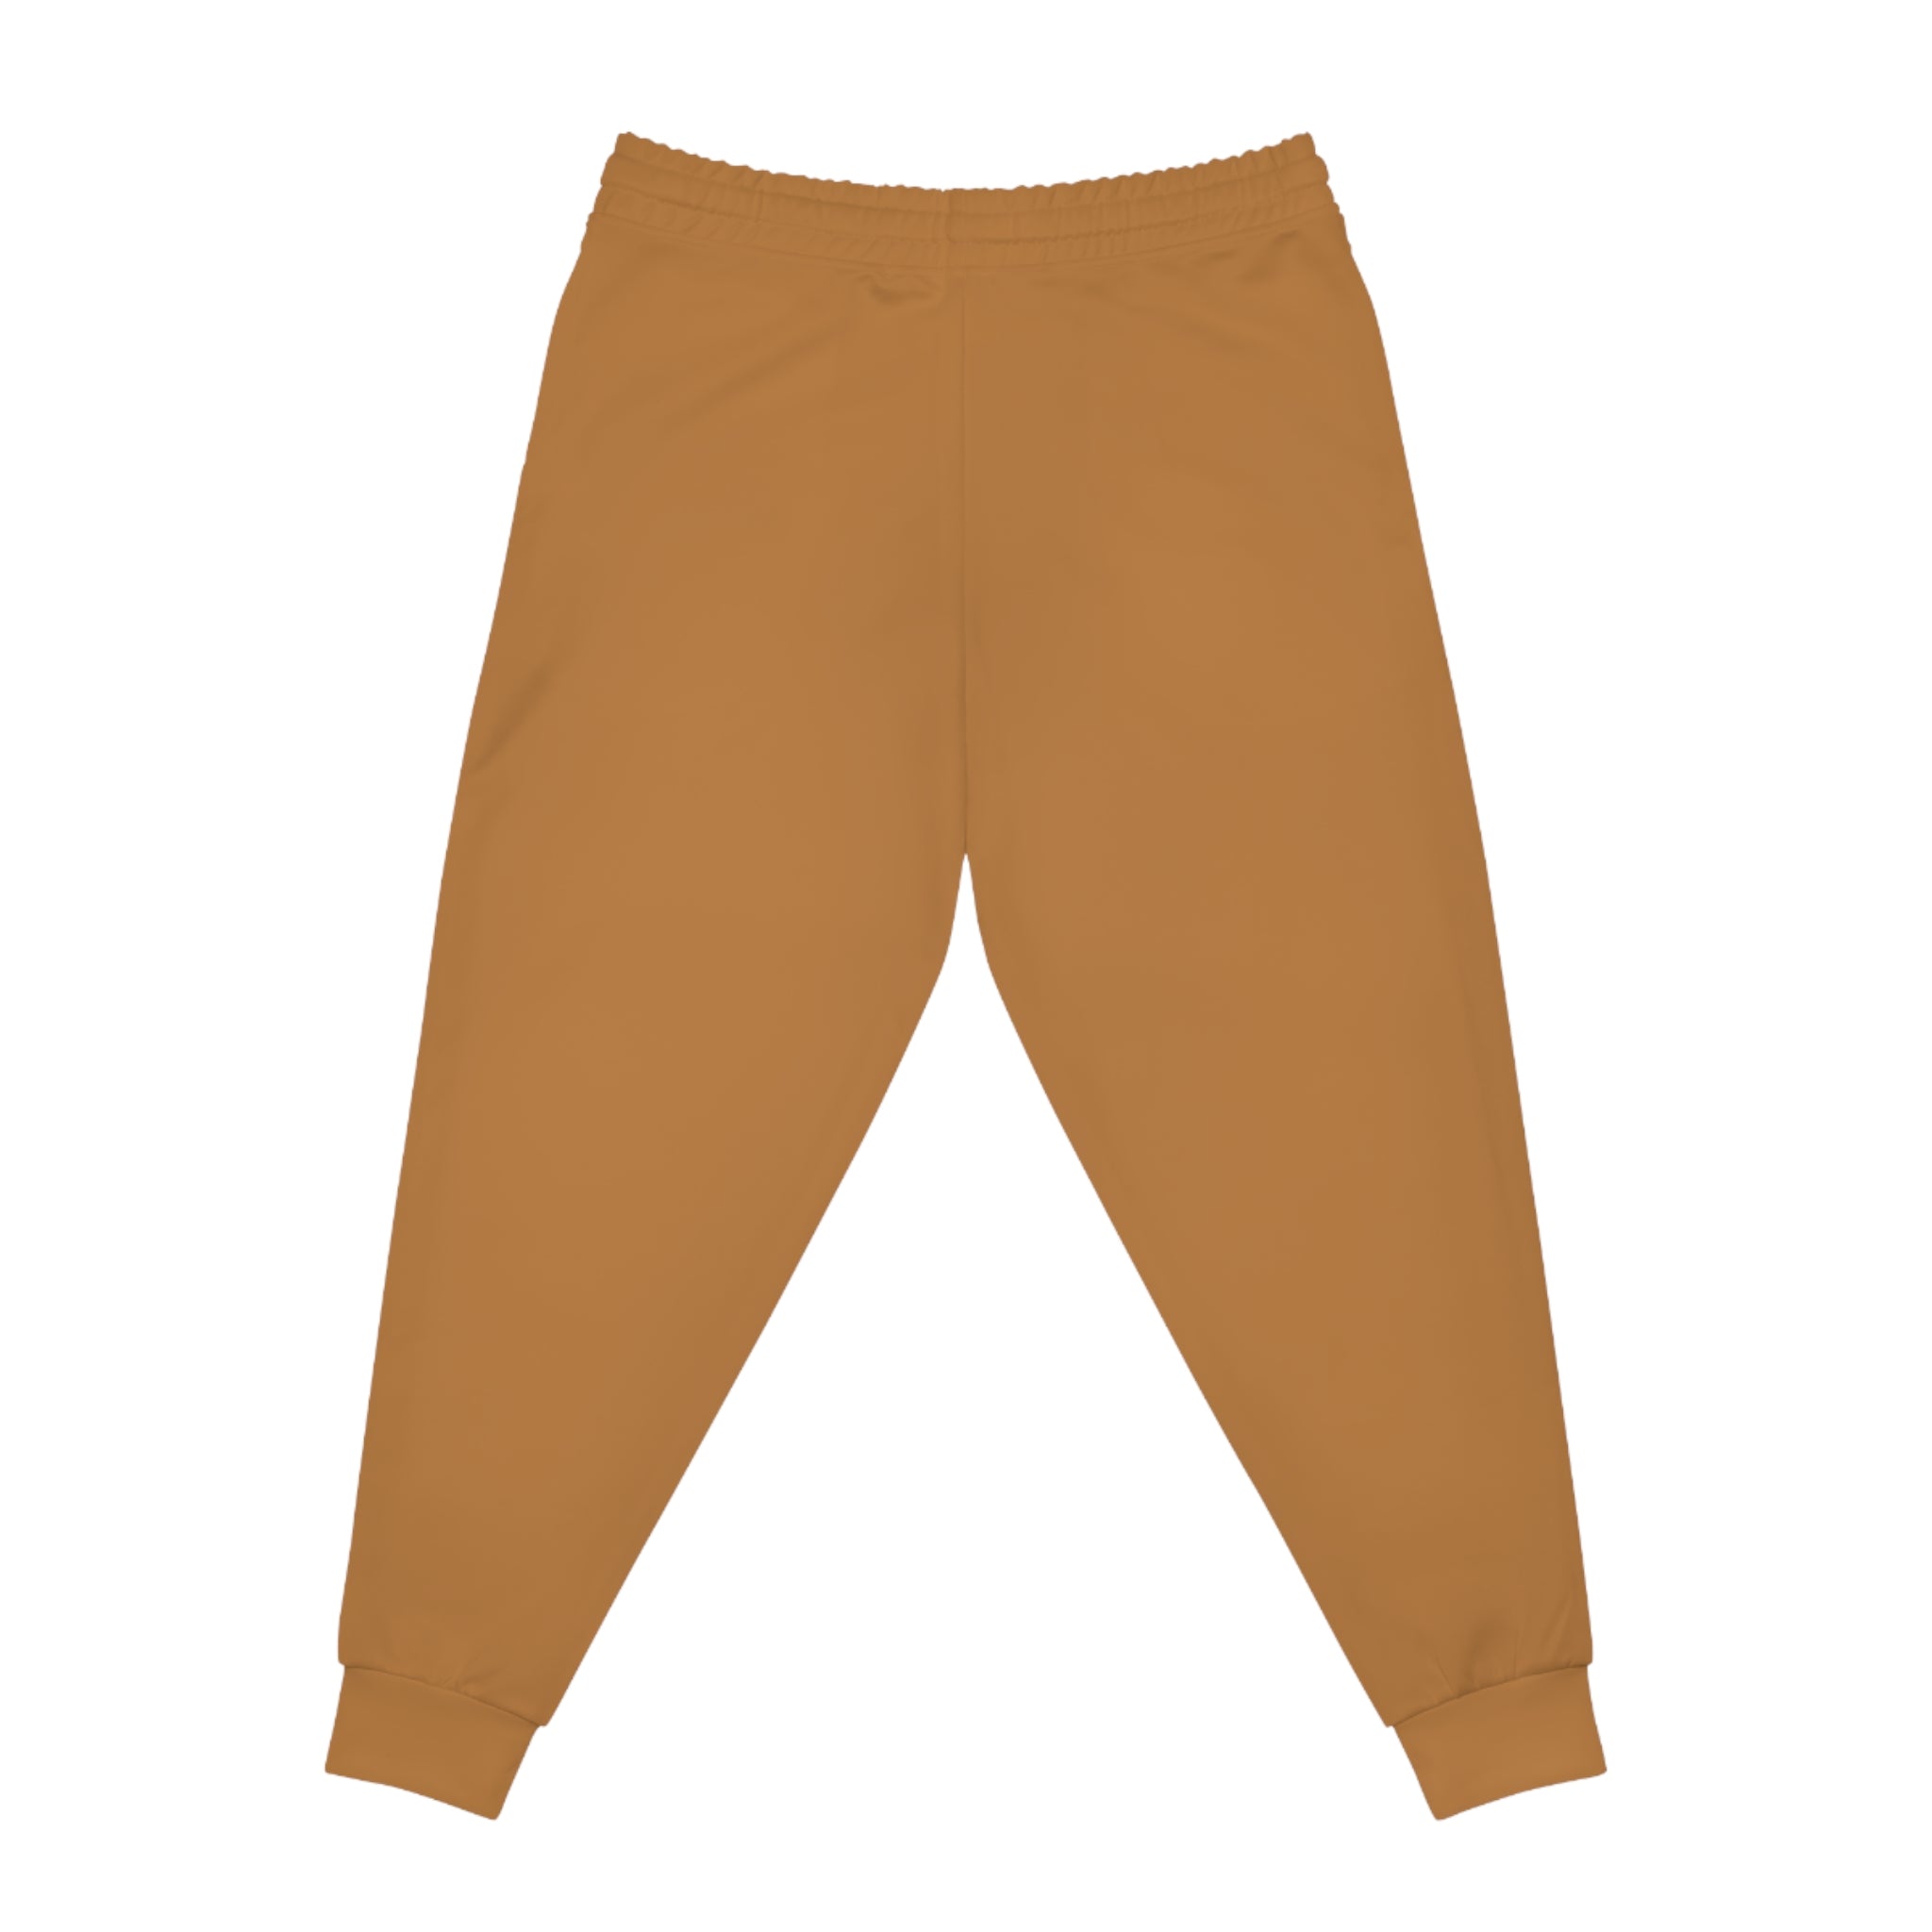 CombinedMinds Athletic Joggers Light Brown/White Logo